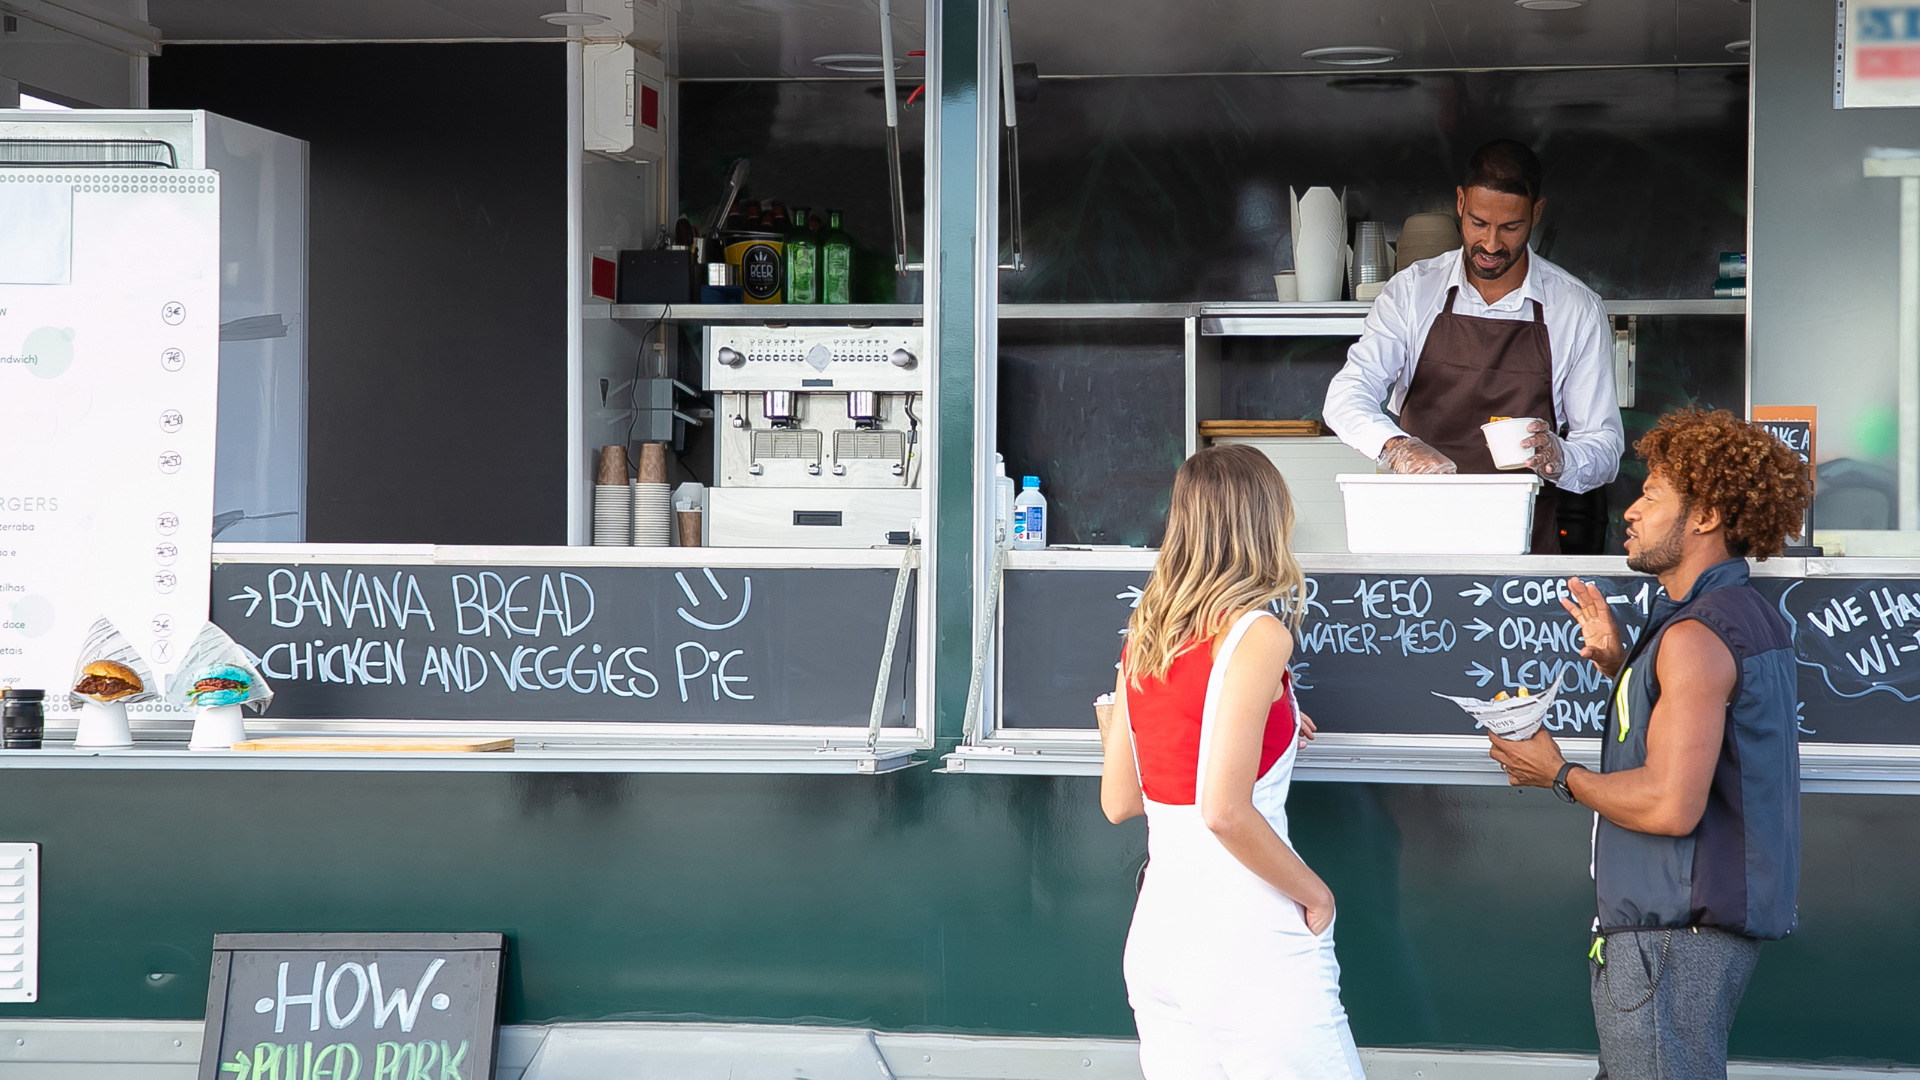 Steal These 7 Proven Food Truck Marketing Strategies